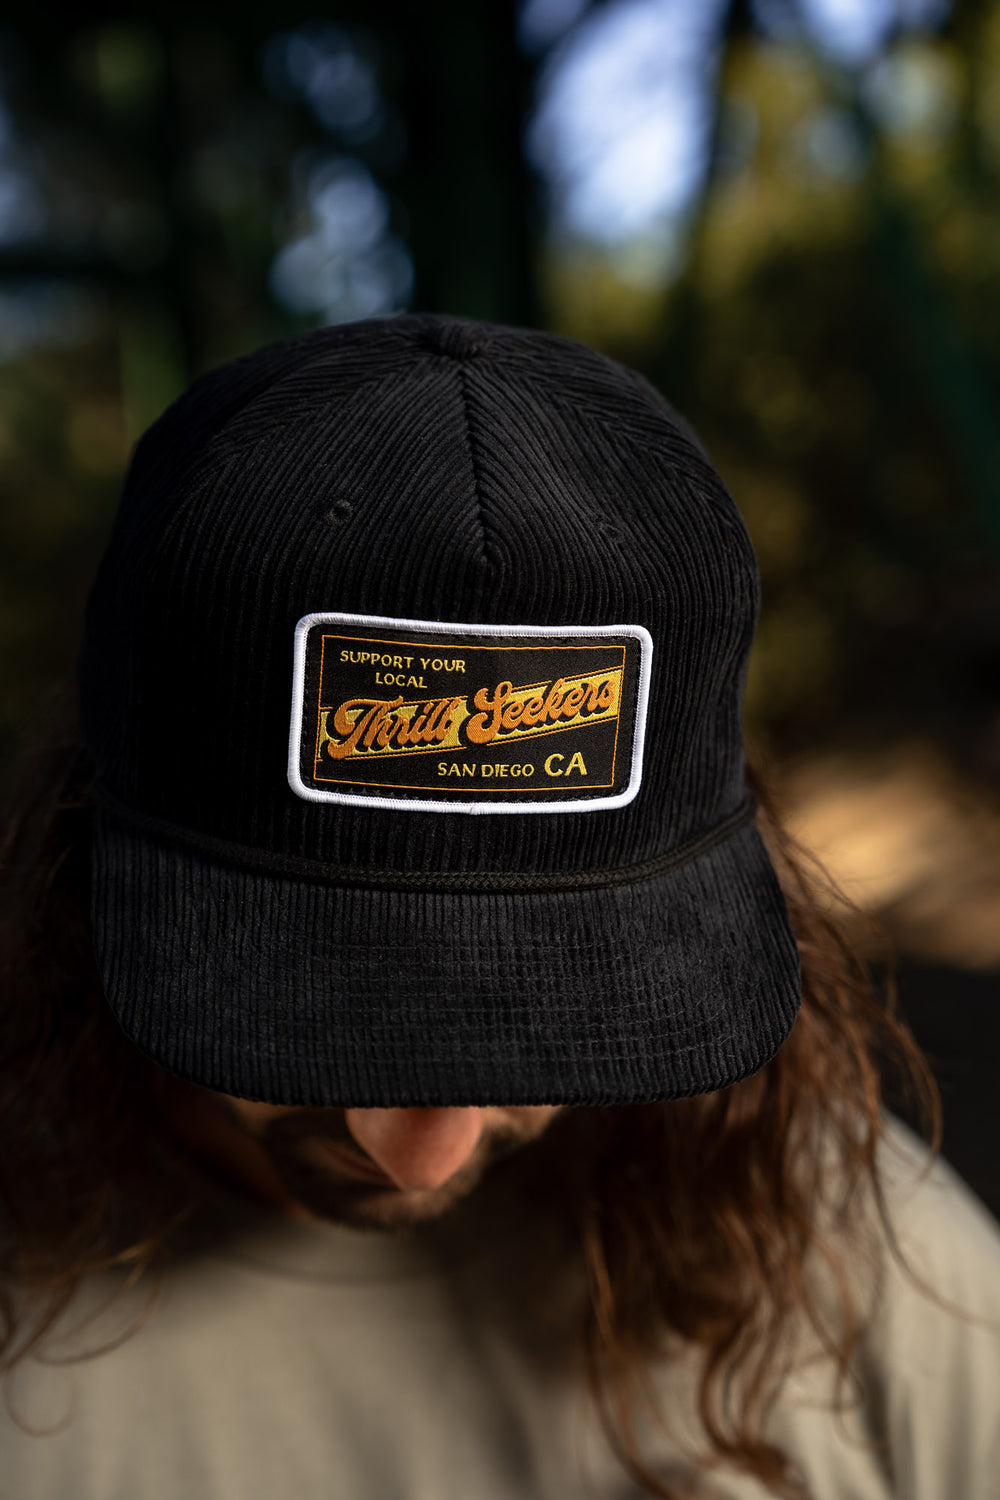 Thrill Seekers The Local Cord Cap Black